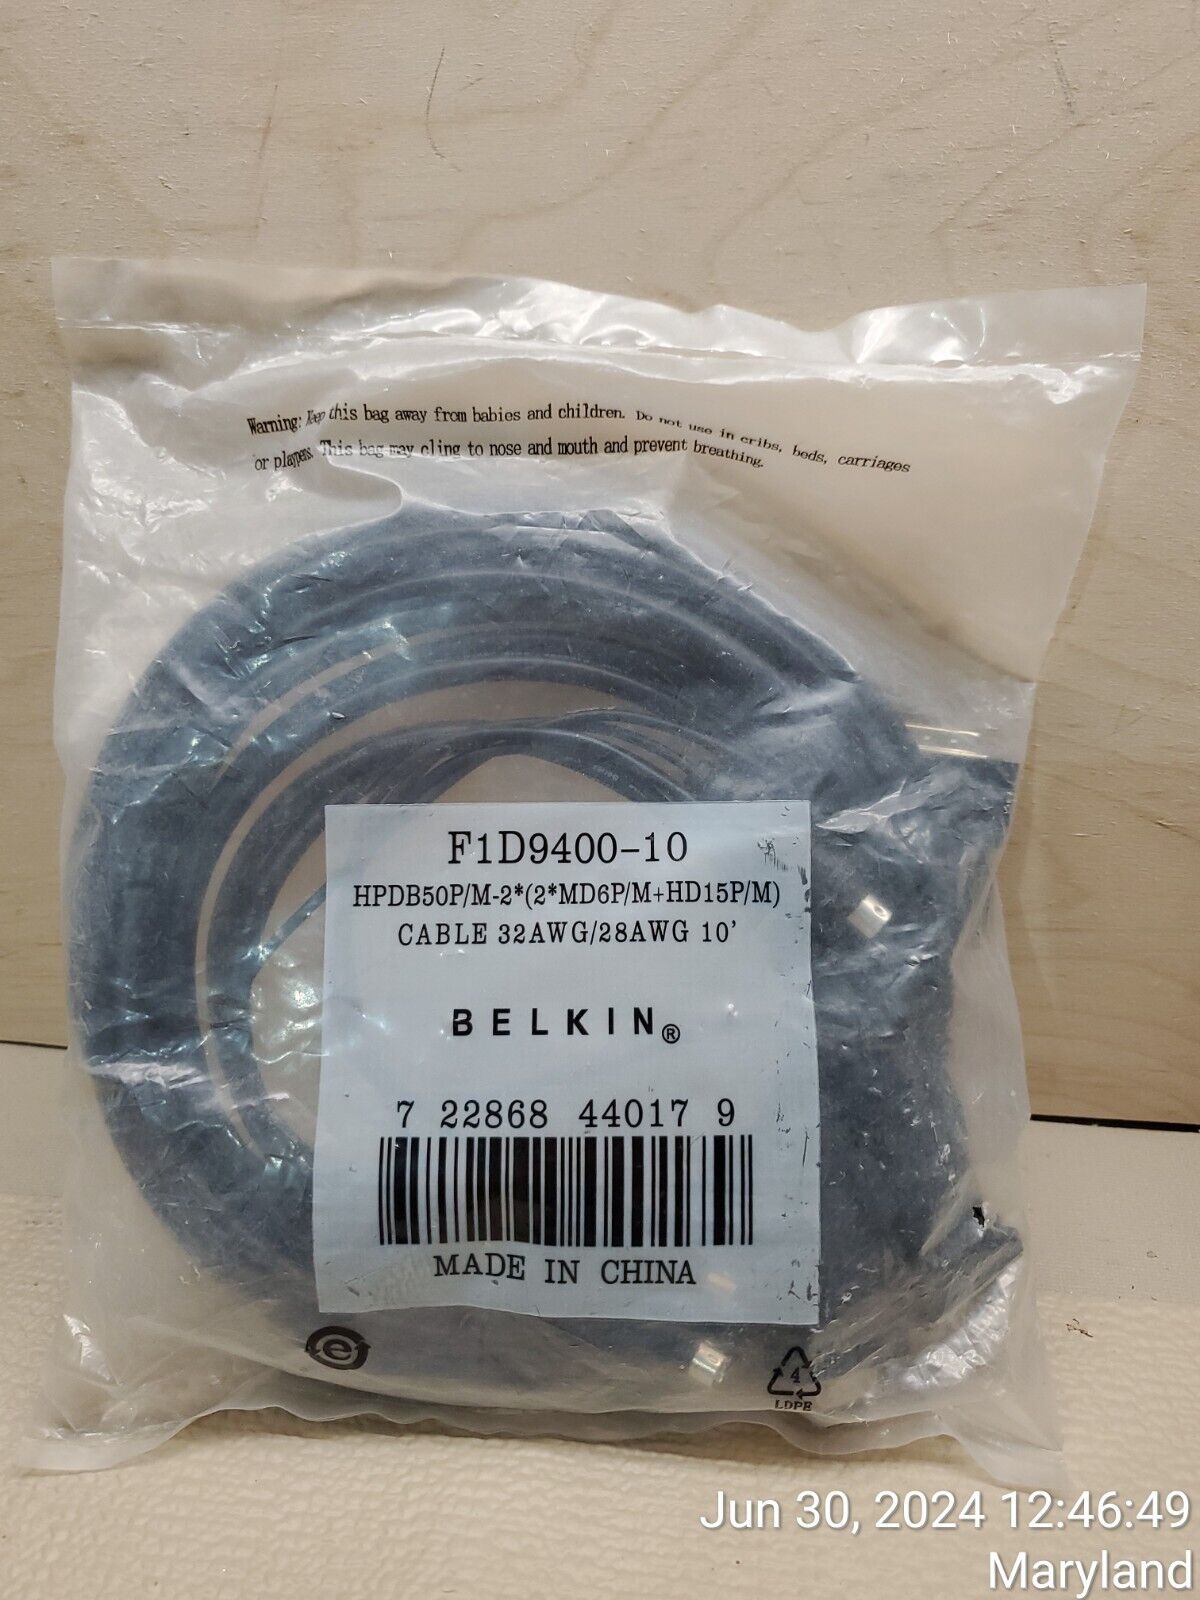  Belkin F1D9400-10 OmniView Dual Port Cable 10' NEW